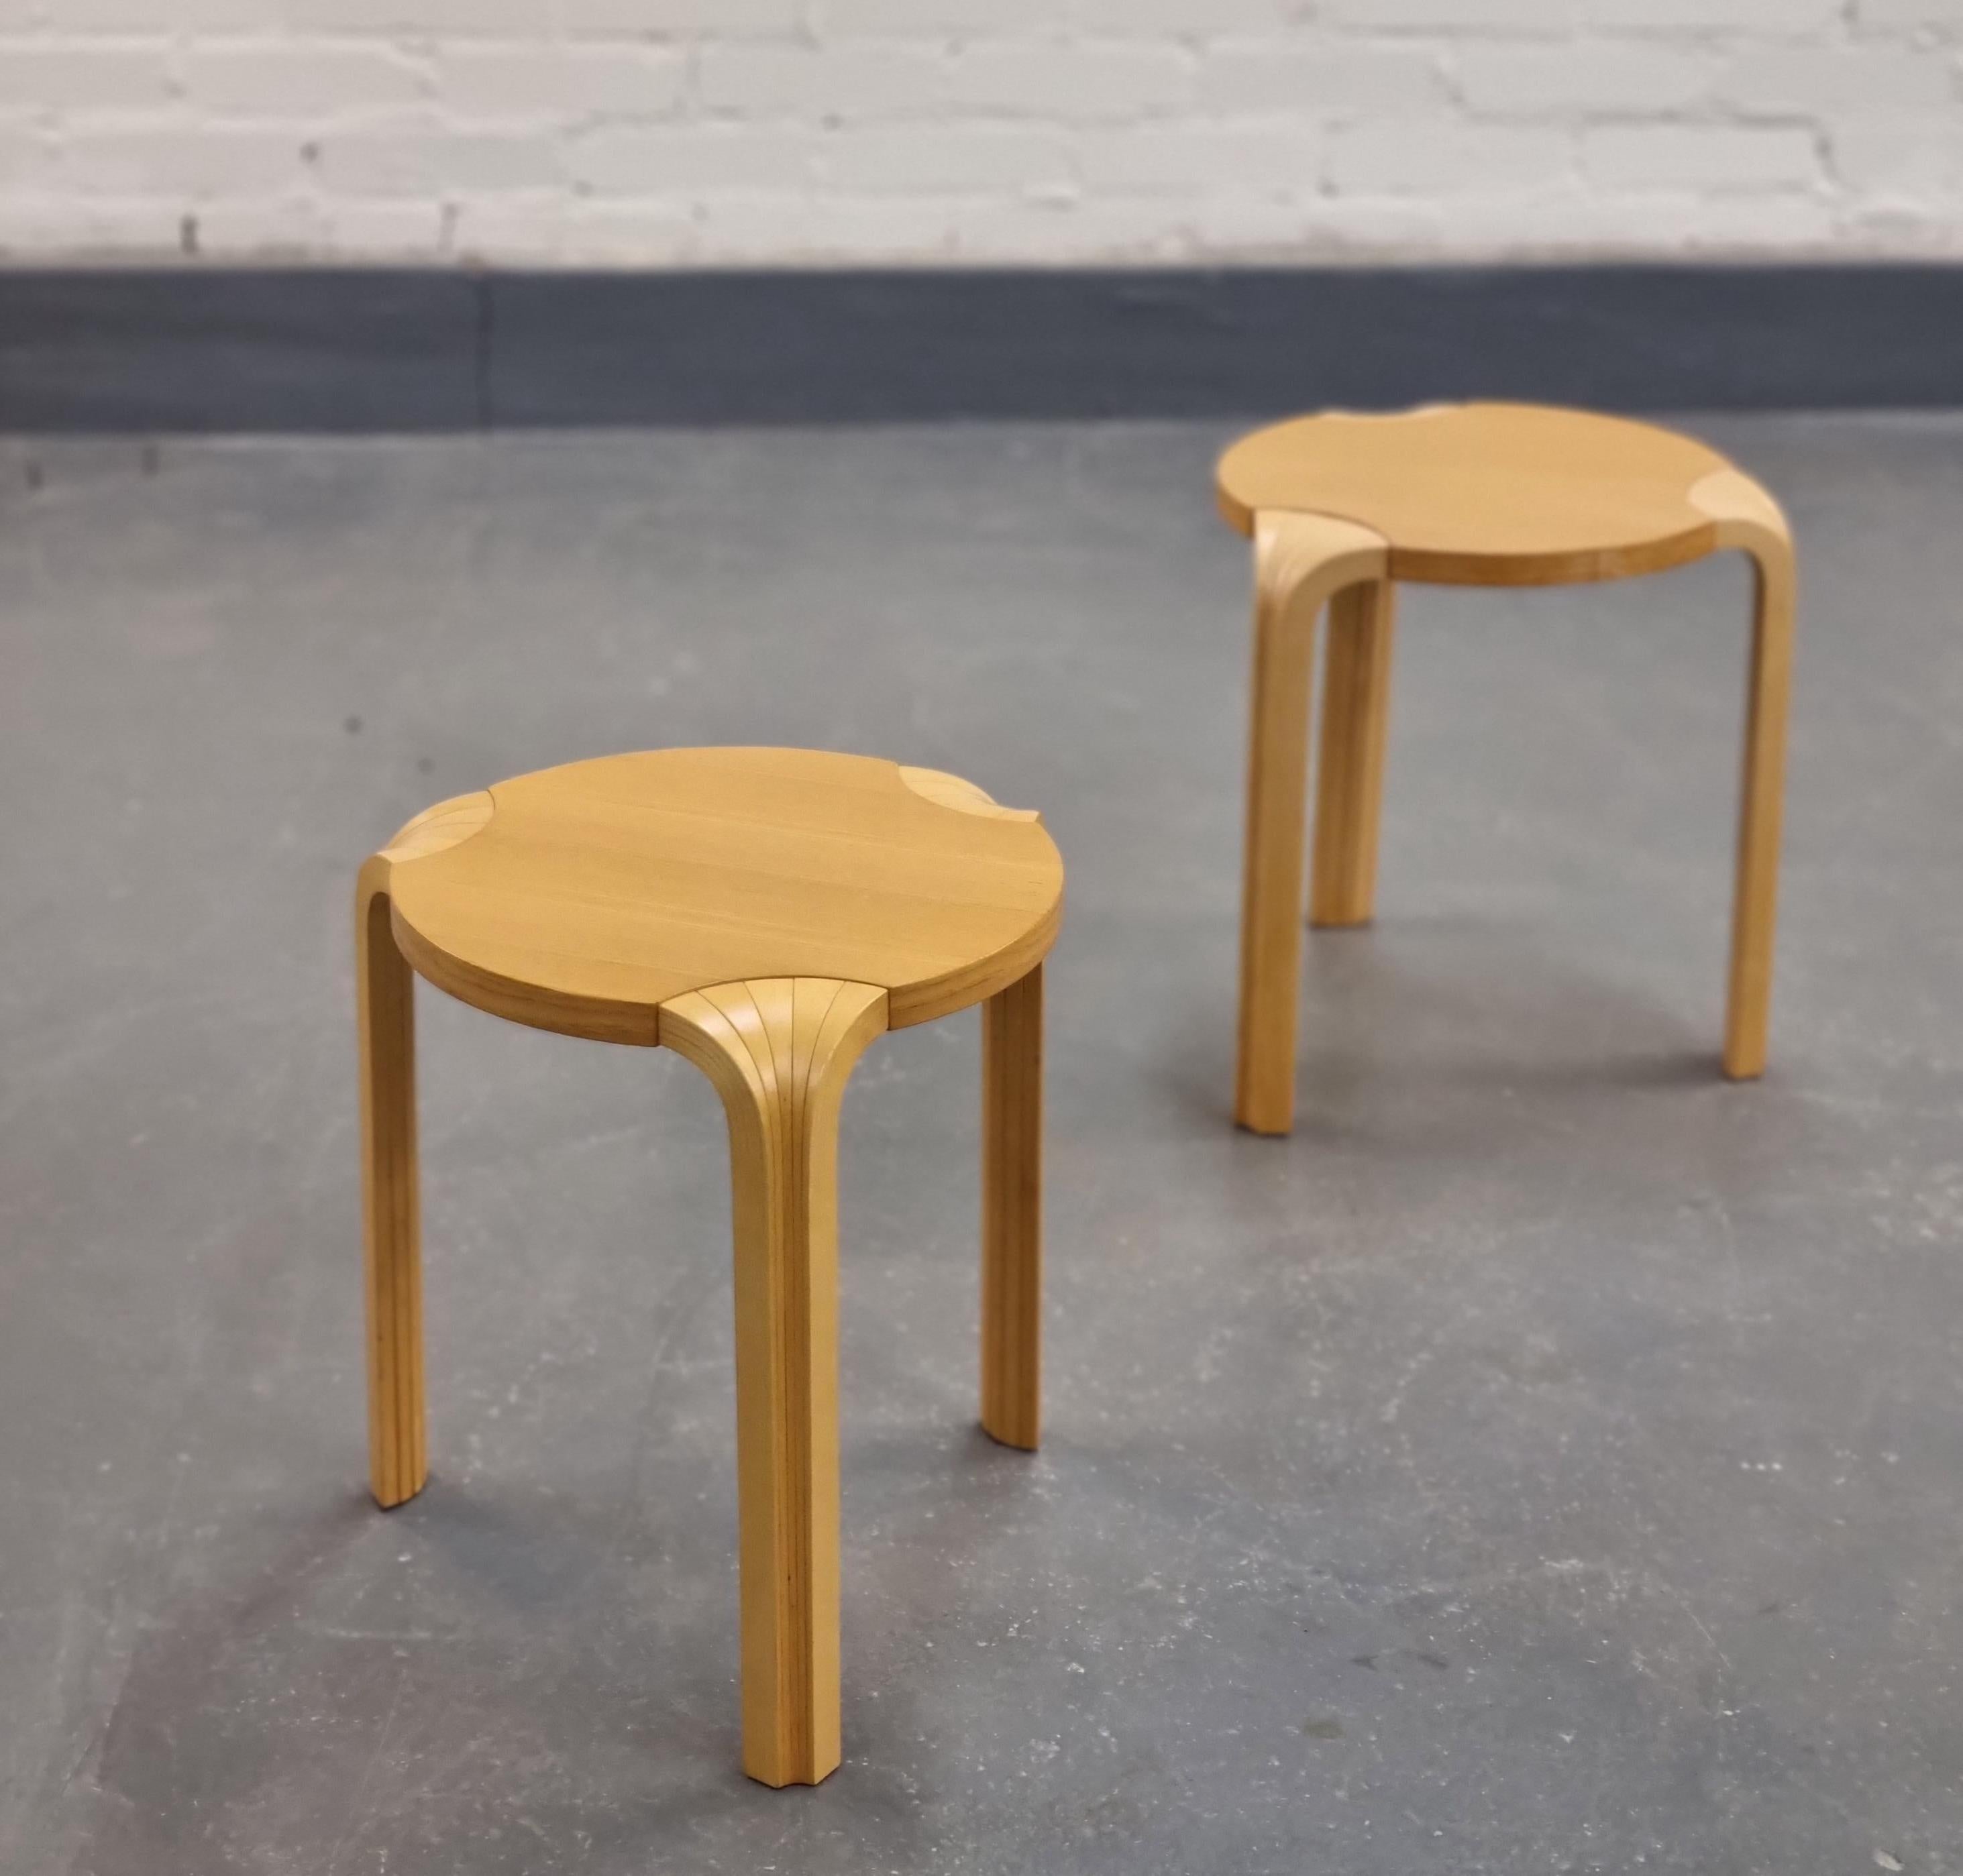 A pair of naturally colored Alvar Aalto' s X600 stools for Artek from 1960s'. The leg of this model is known as the fan shaped. The stool is stackable and thus makes a timeless choice for any demanding space.
Some marks and signs of wear, but